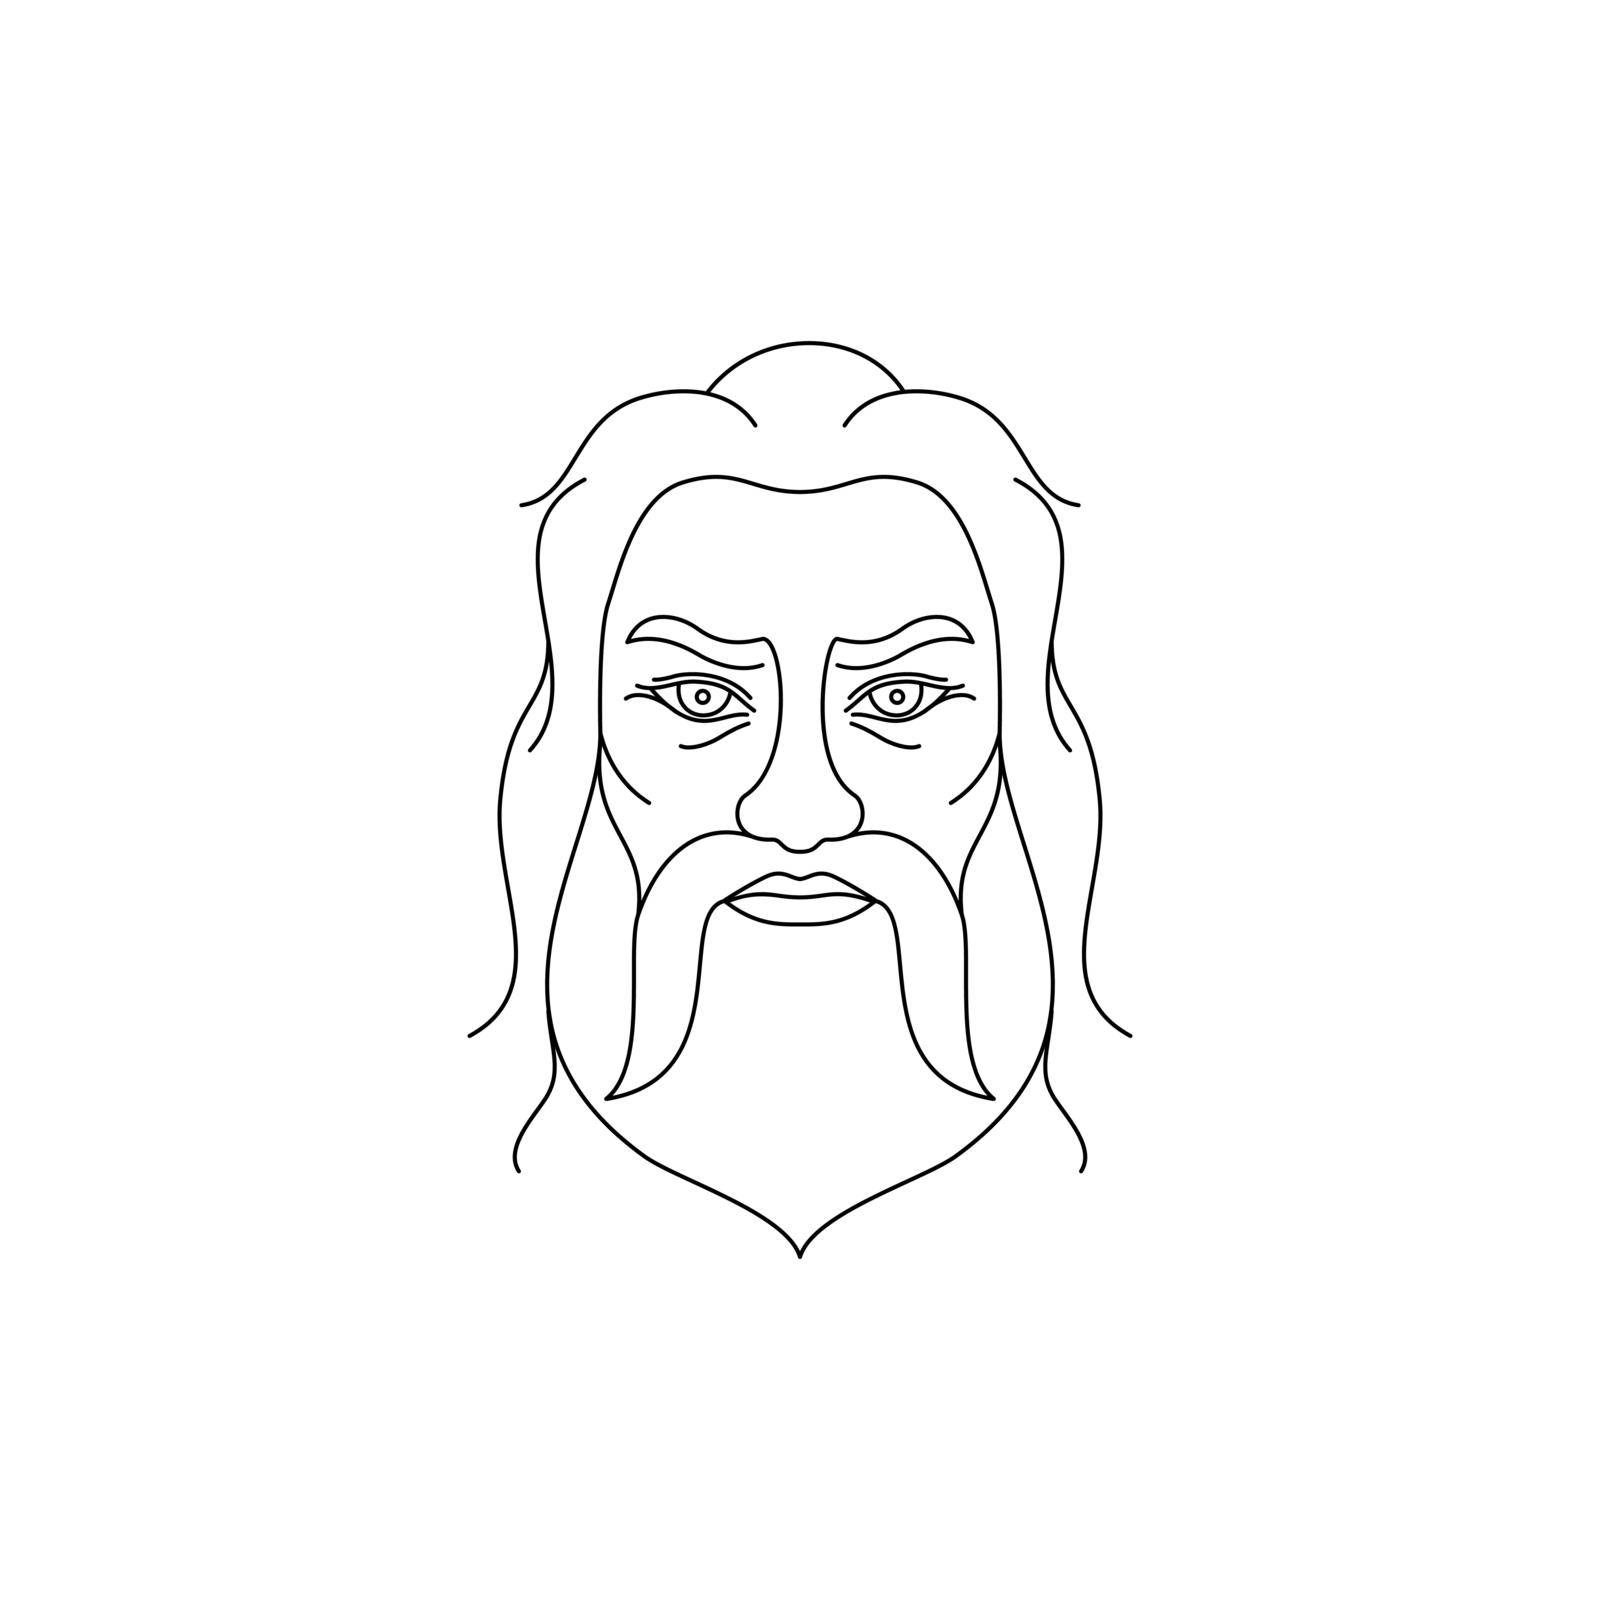 Icon of man in line art style on white background.